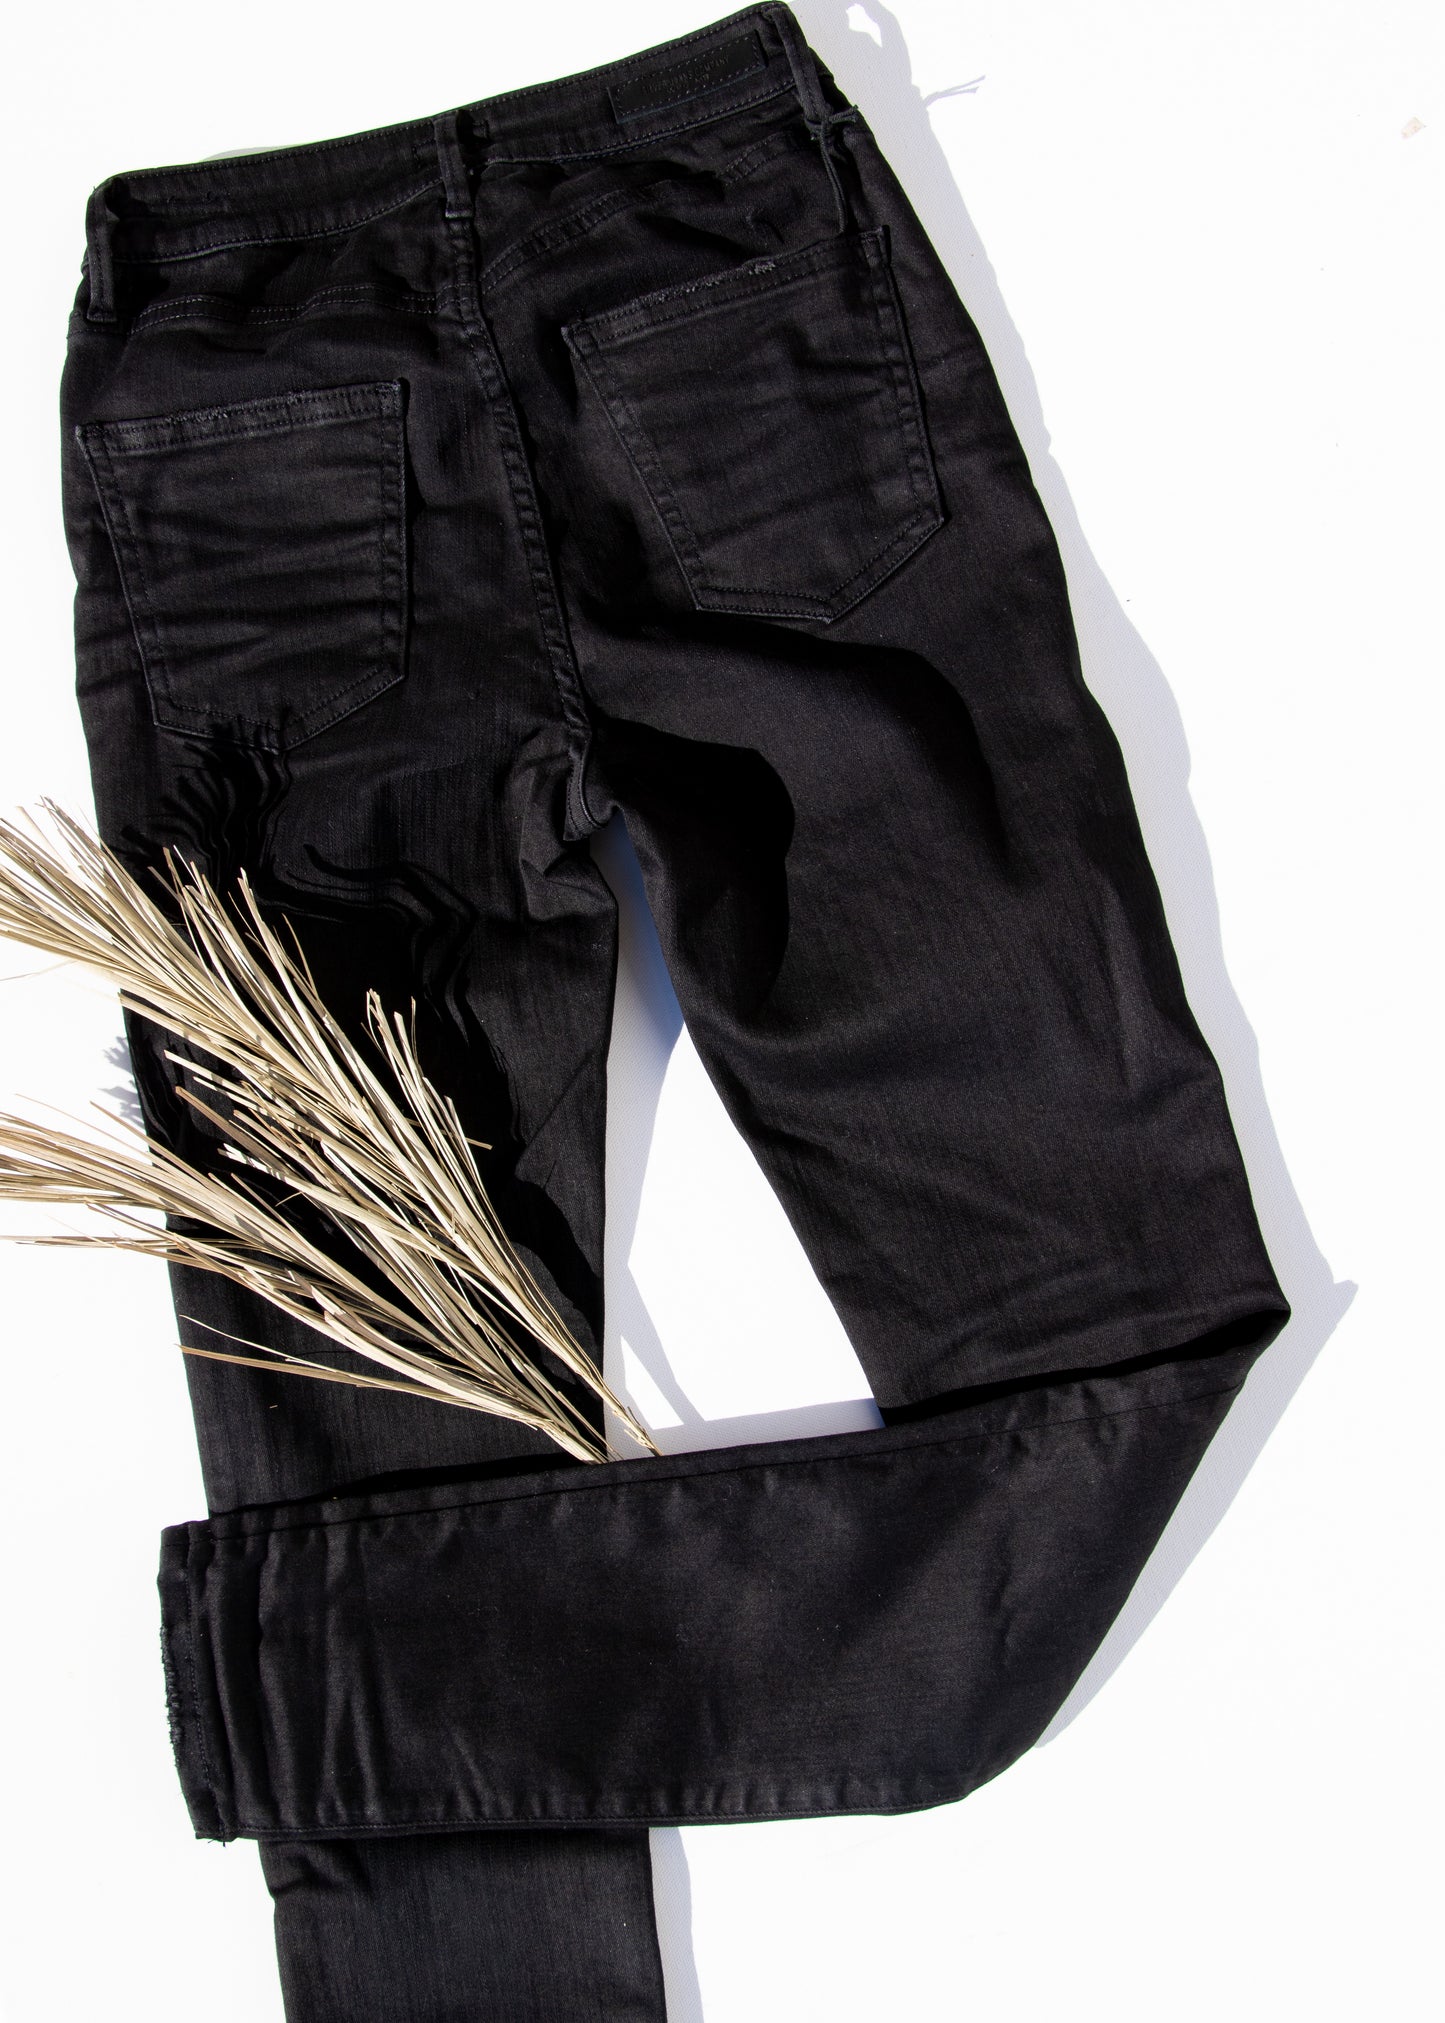 For Us Isbister - BLACK - 29" INSEAM